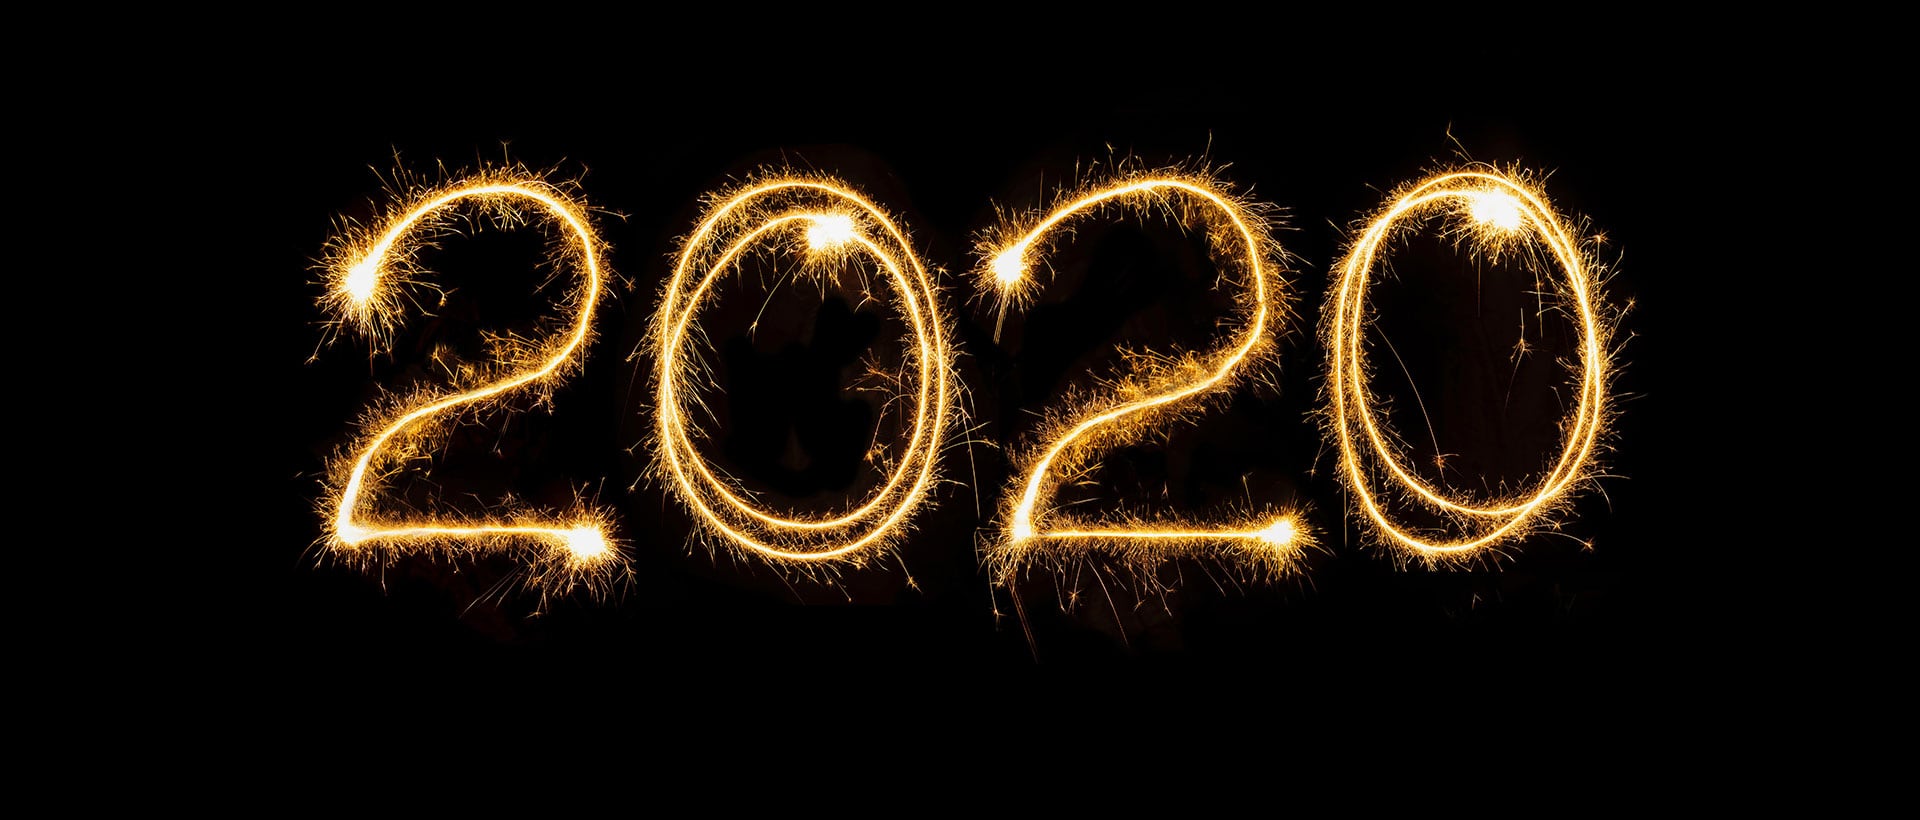 the numbers 2020 written with sparklers